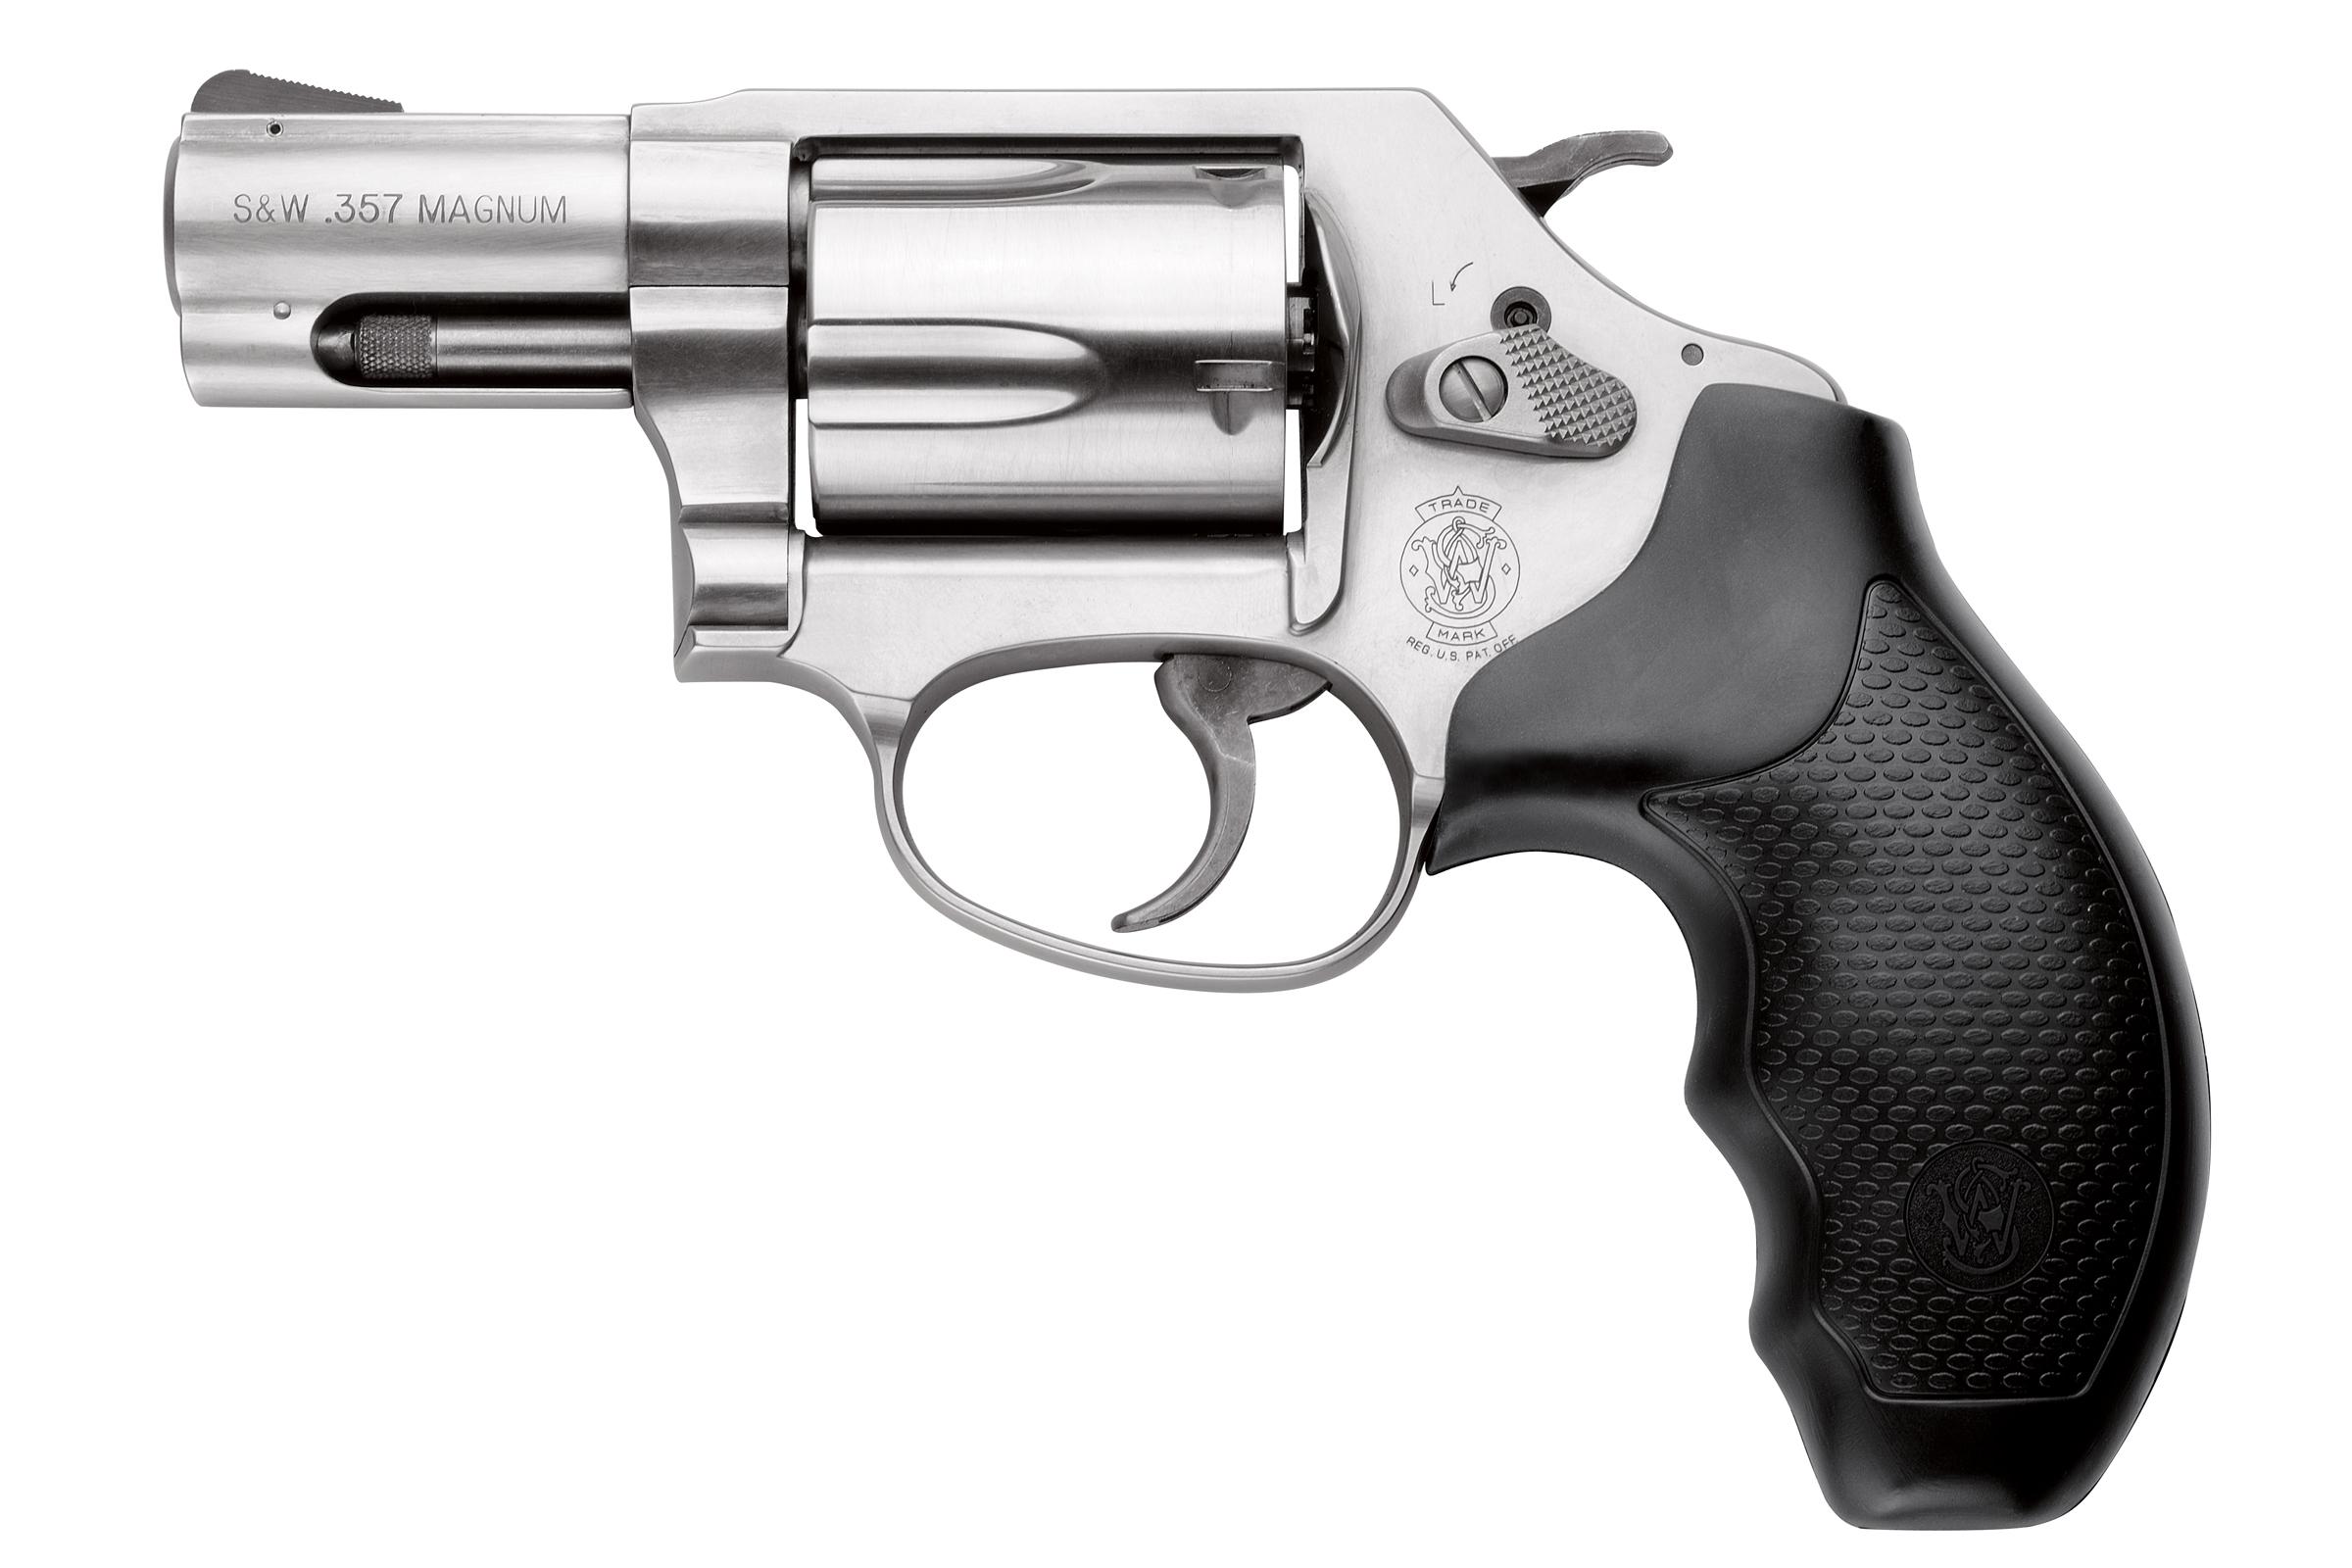  Smith & Wesson 60 2.125 